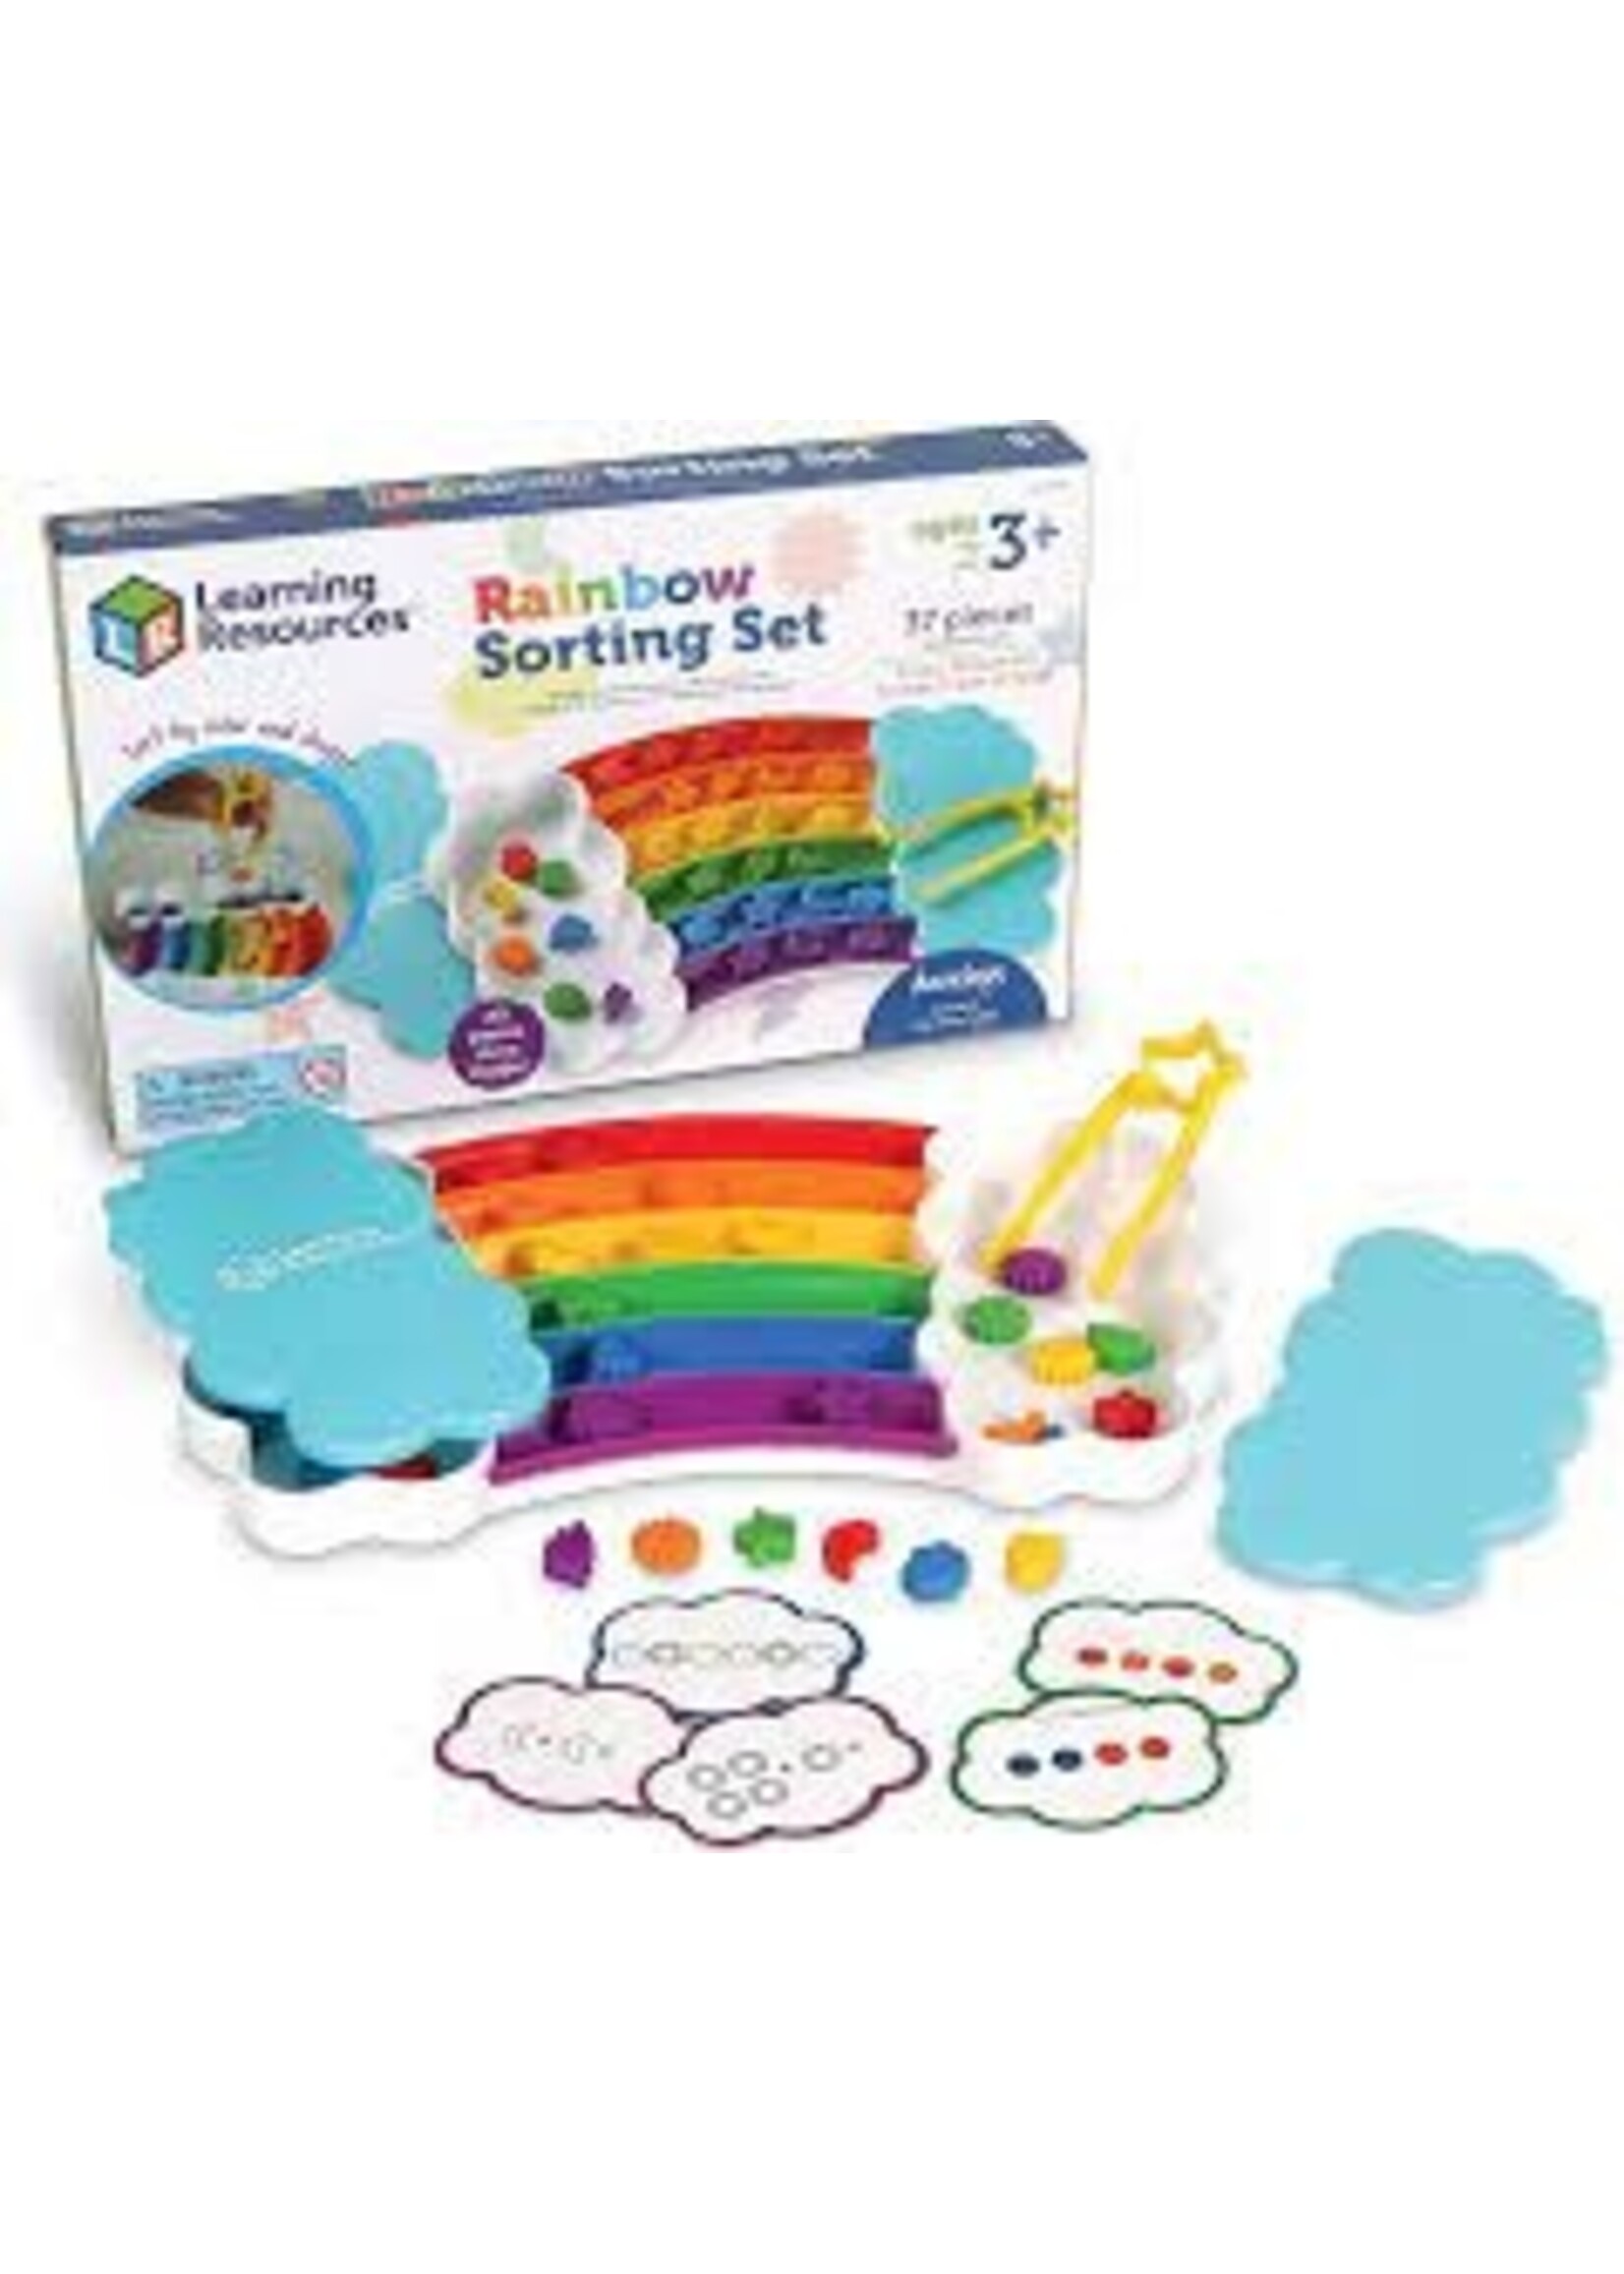 Learning Resources Rainbow sorting set